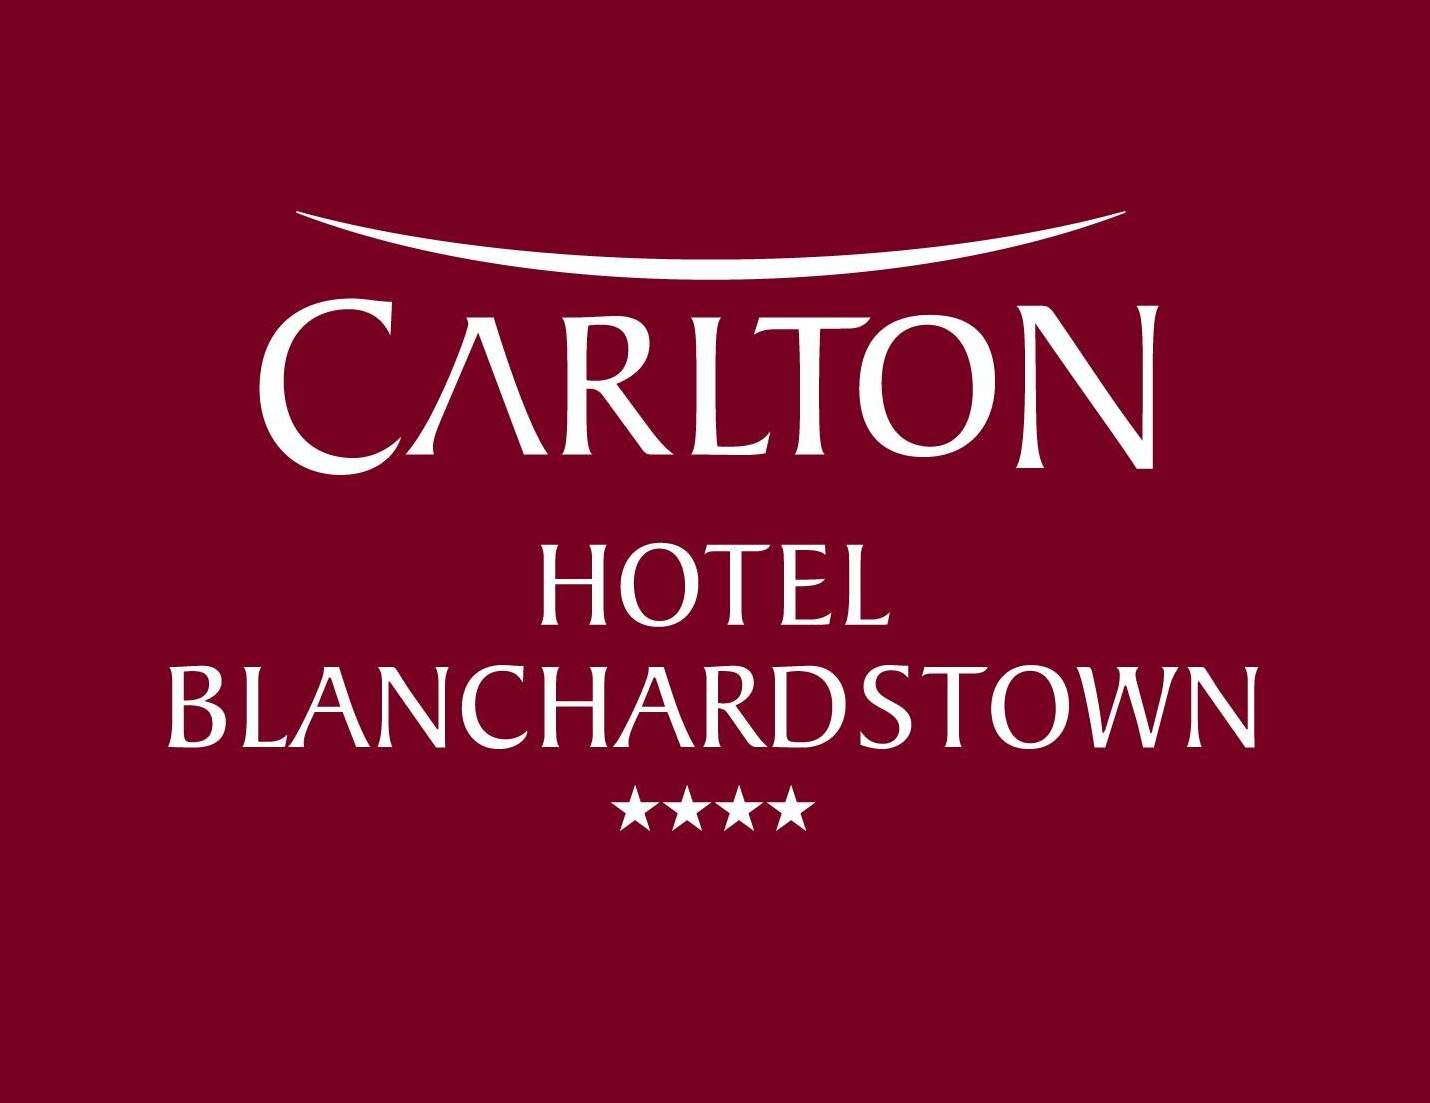 We are a 4 star hotel located in Dublin 15. For bookings call +353 1 827 5600 or visit https://t.co/UauNyKuitk #CarltonBlanch #Dublin